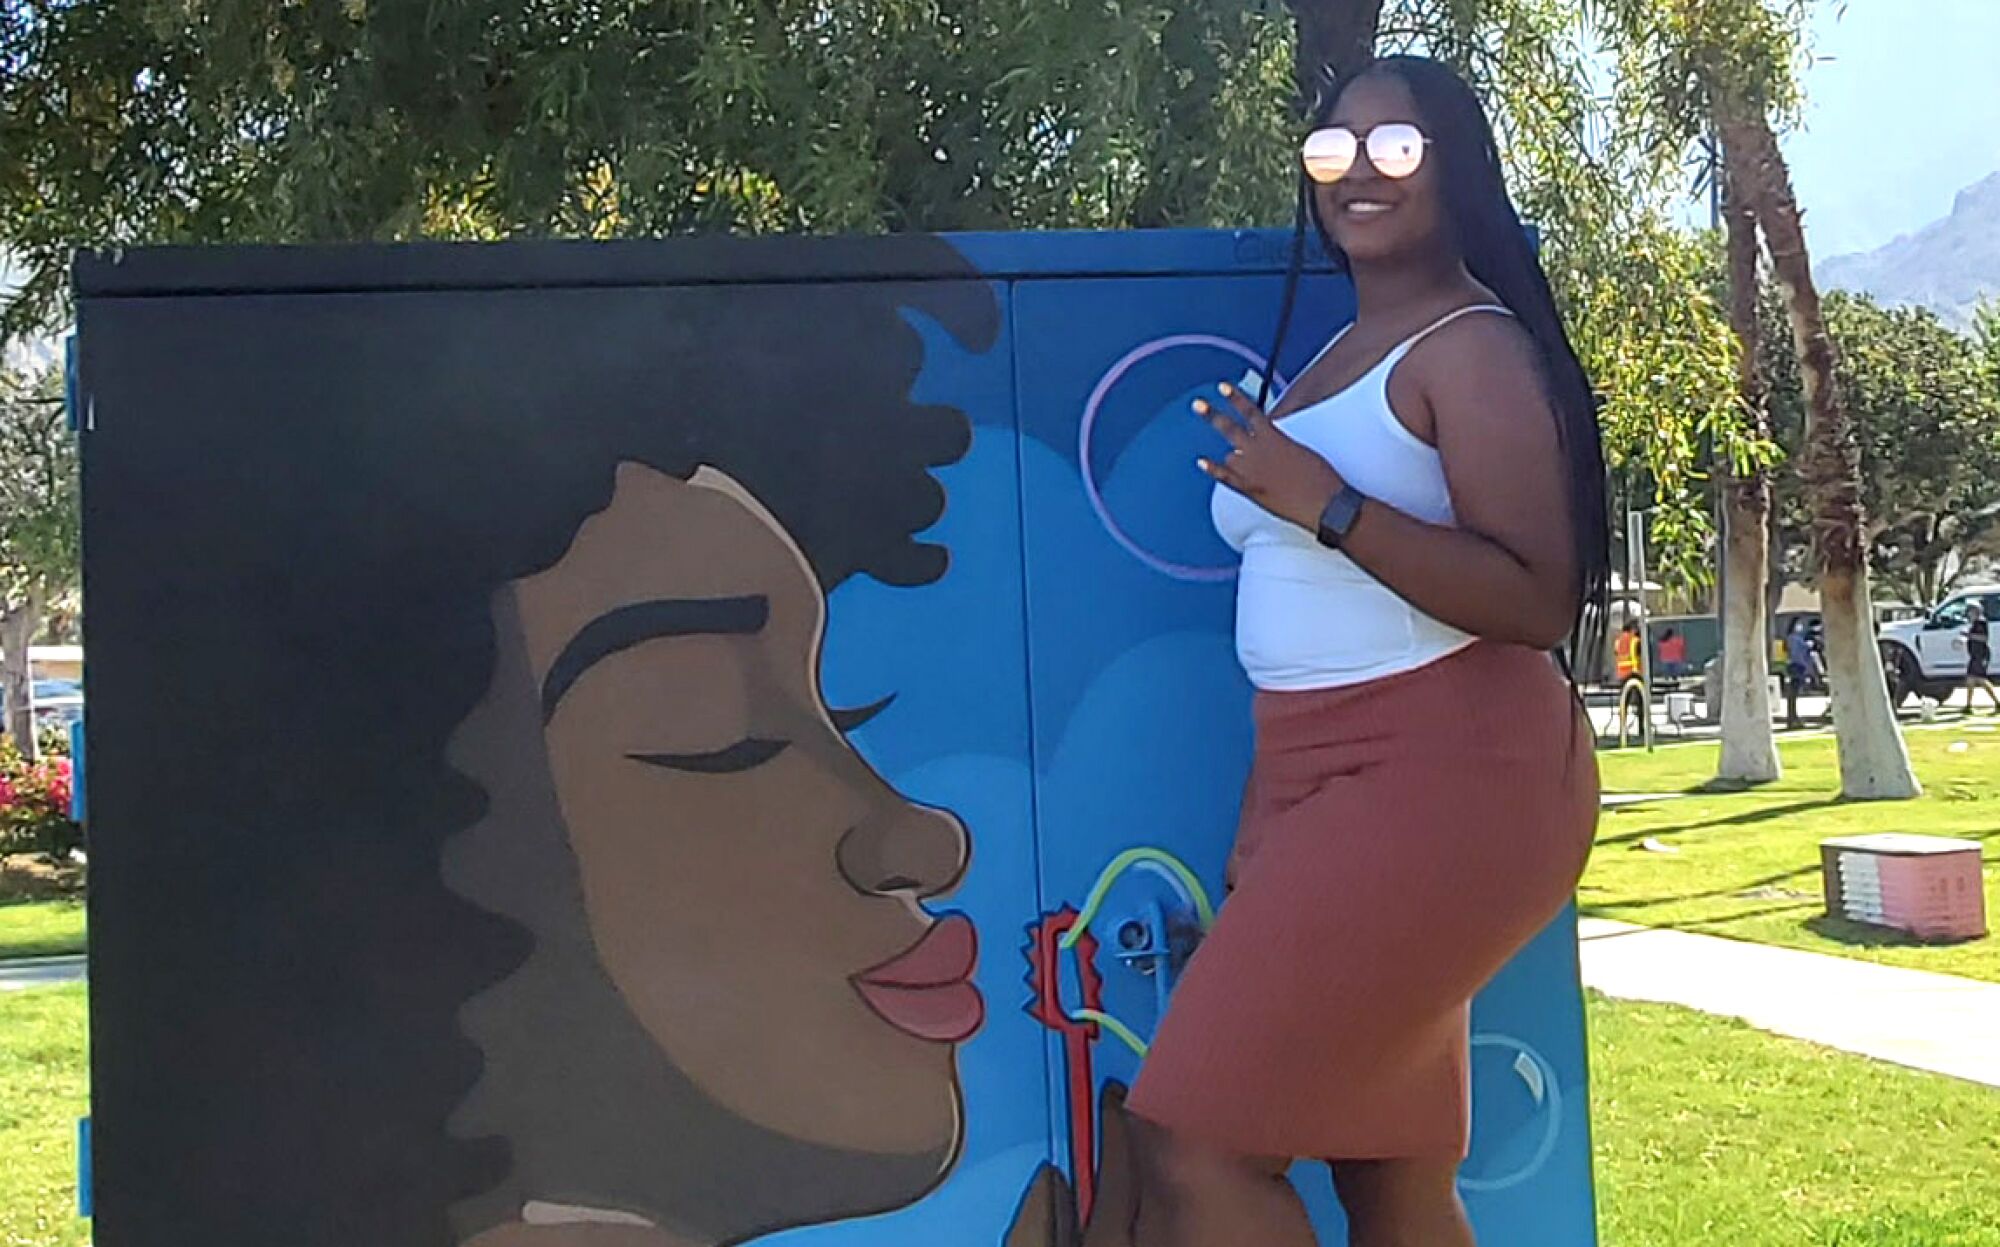 Palm Springs native La’Ronjanae Curtis stands by a mural of a person blowing bubbles.